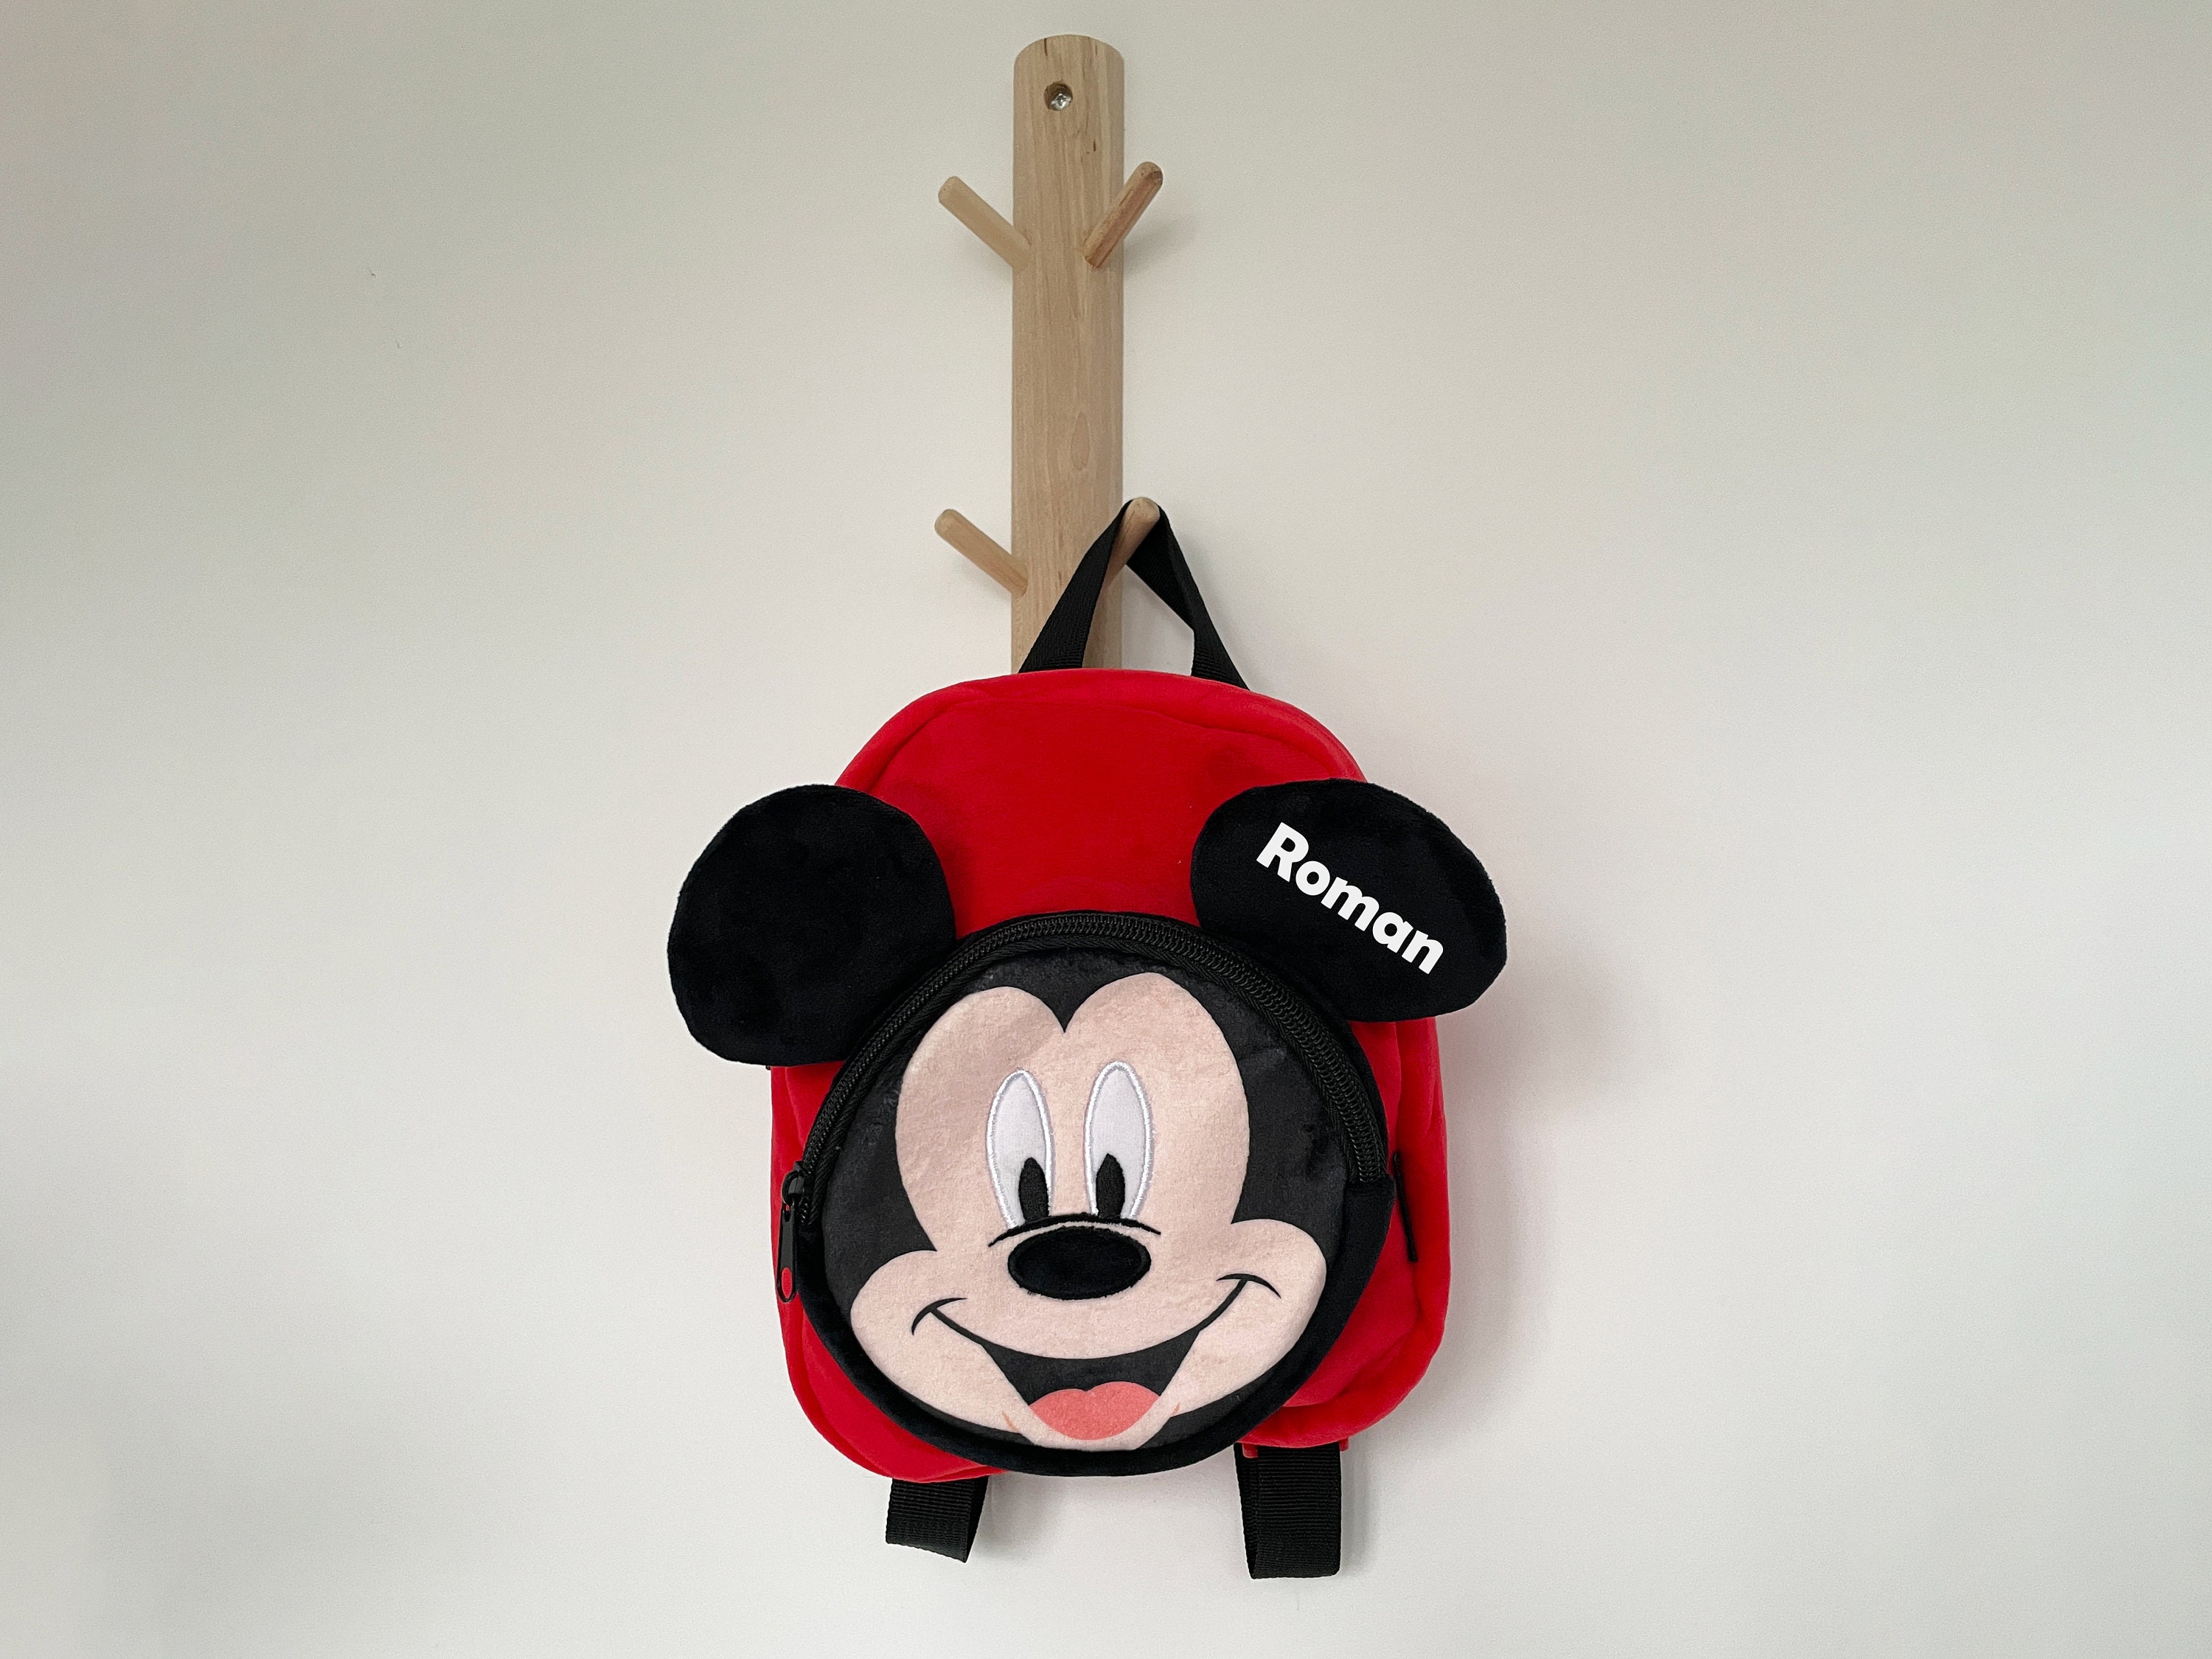 Micky Mouse Handbag in RM6 London for £15.00 for sale